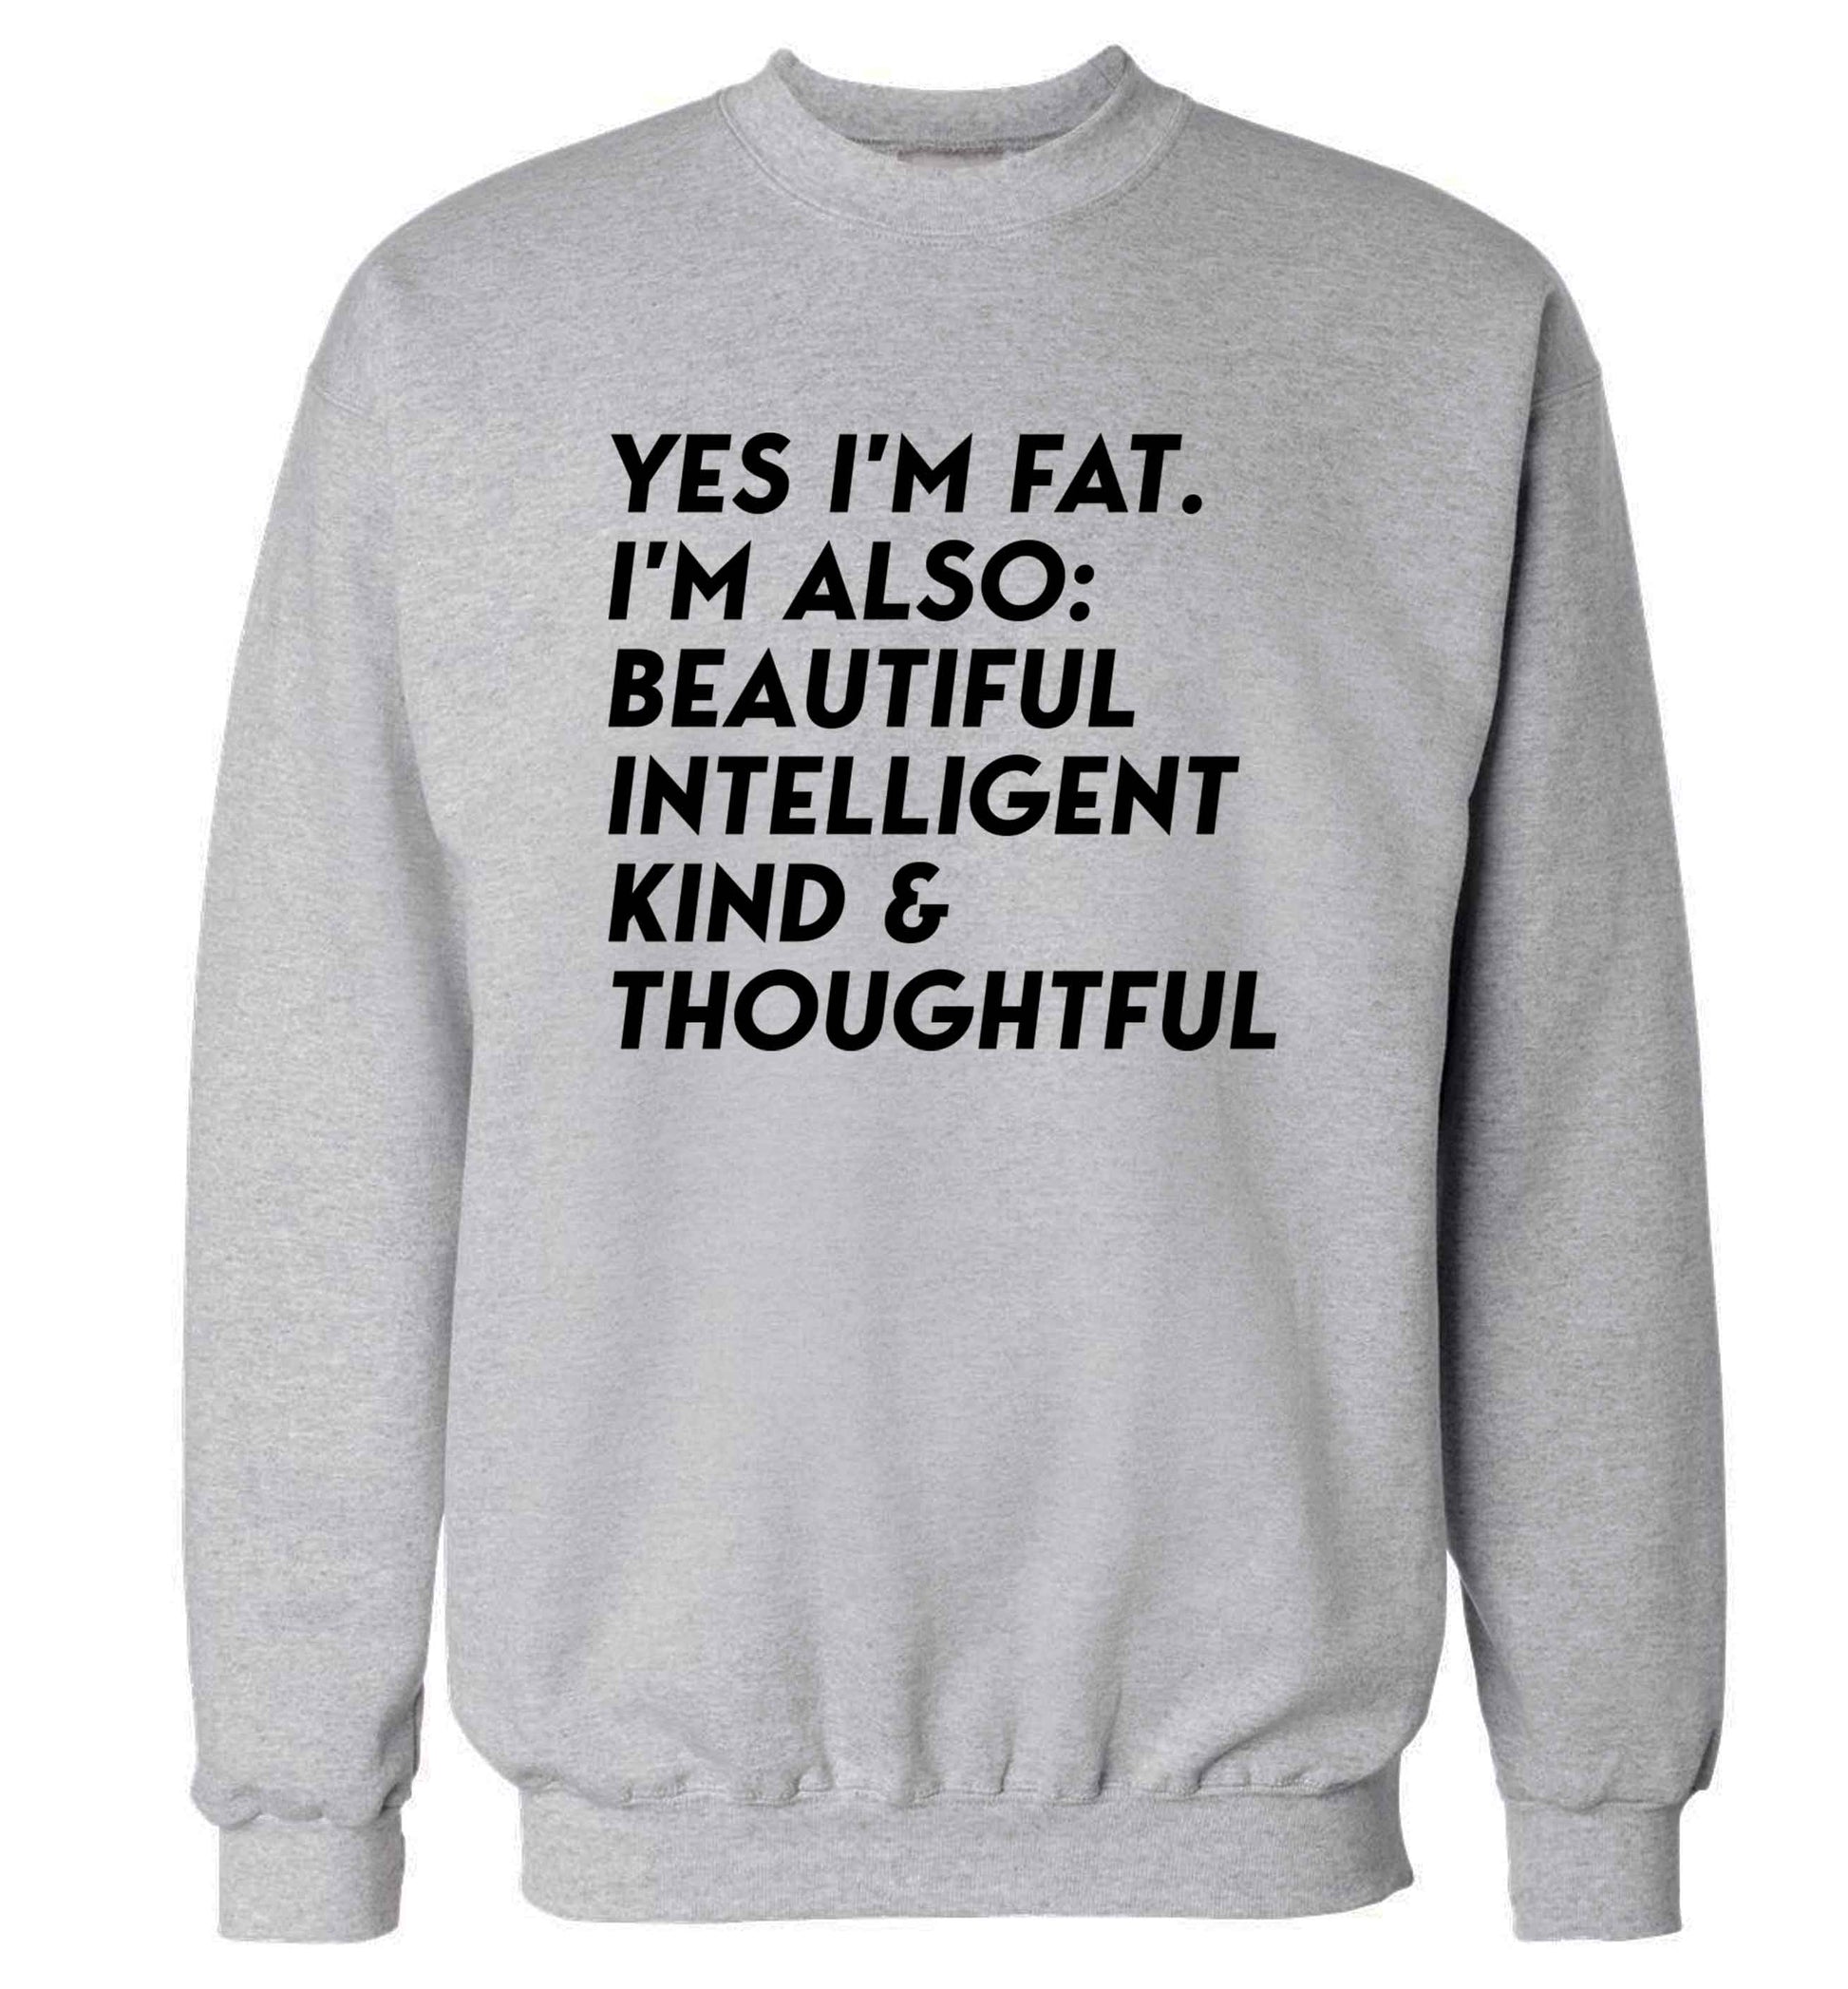 Yes I'm fat. I'm also: Beautiful intelligent kind and thoughtful adult's unisex grey sweater 2XL